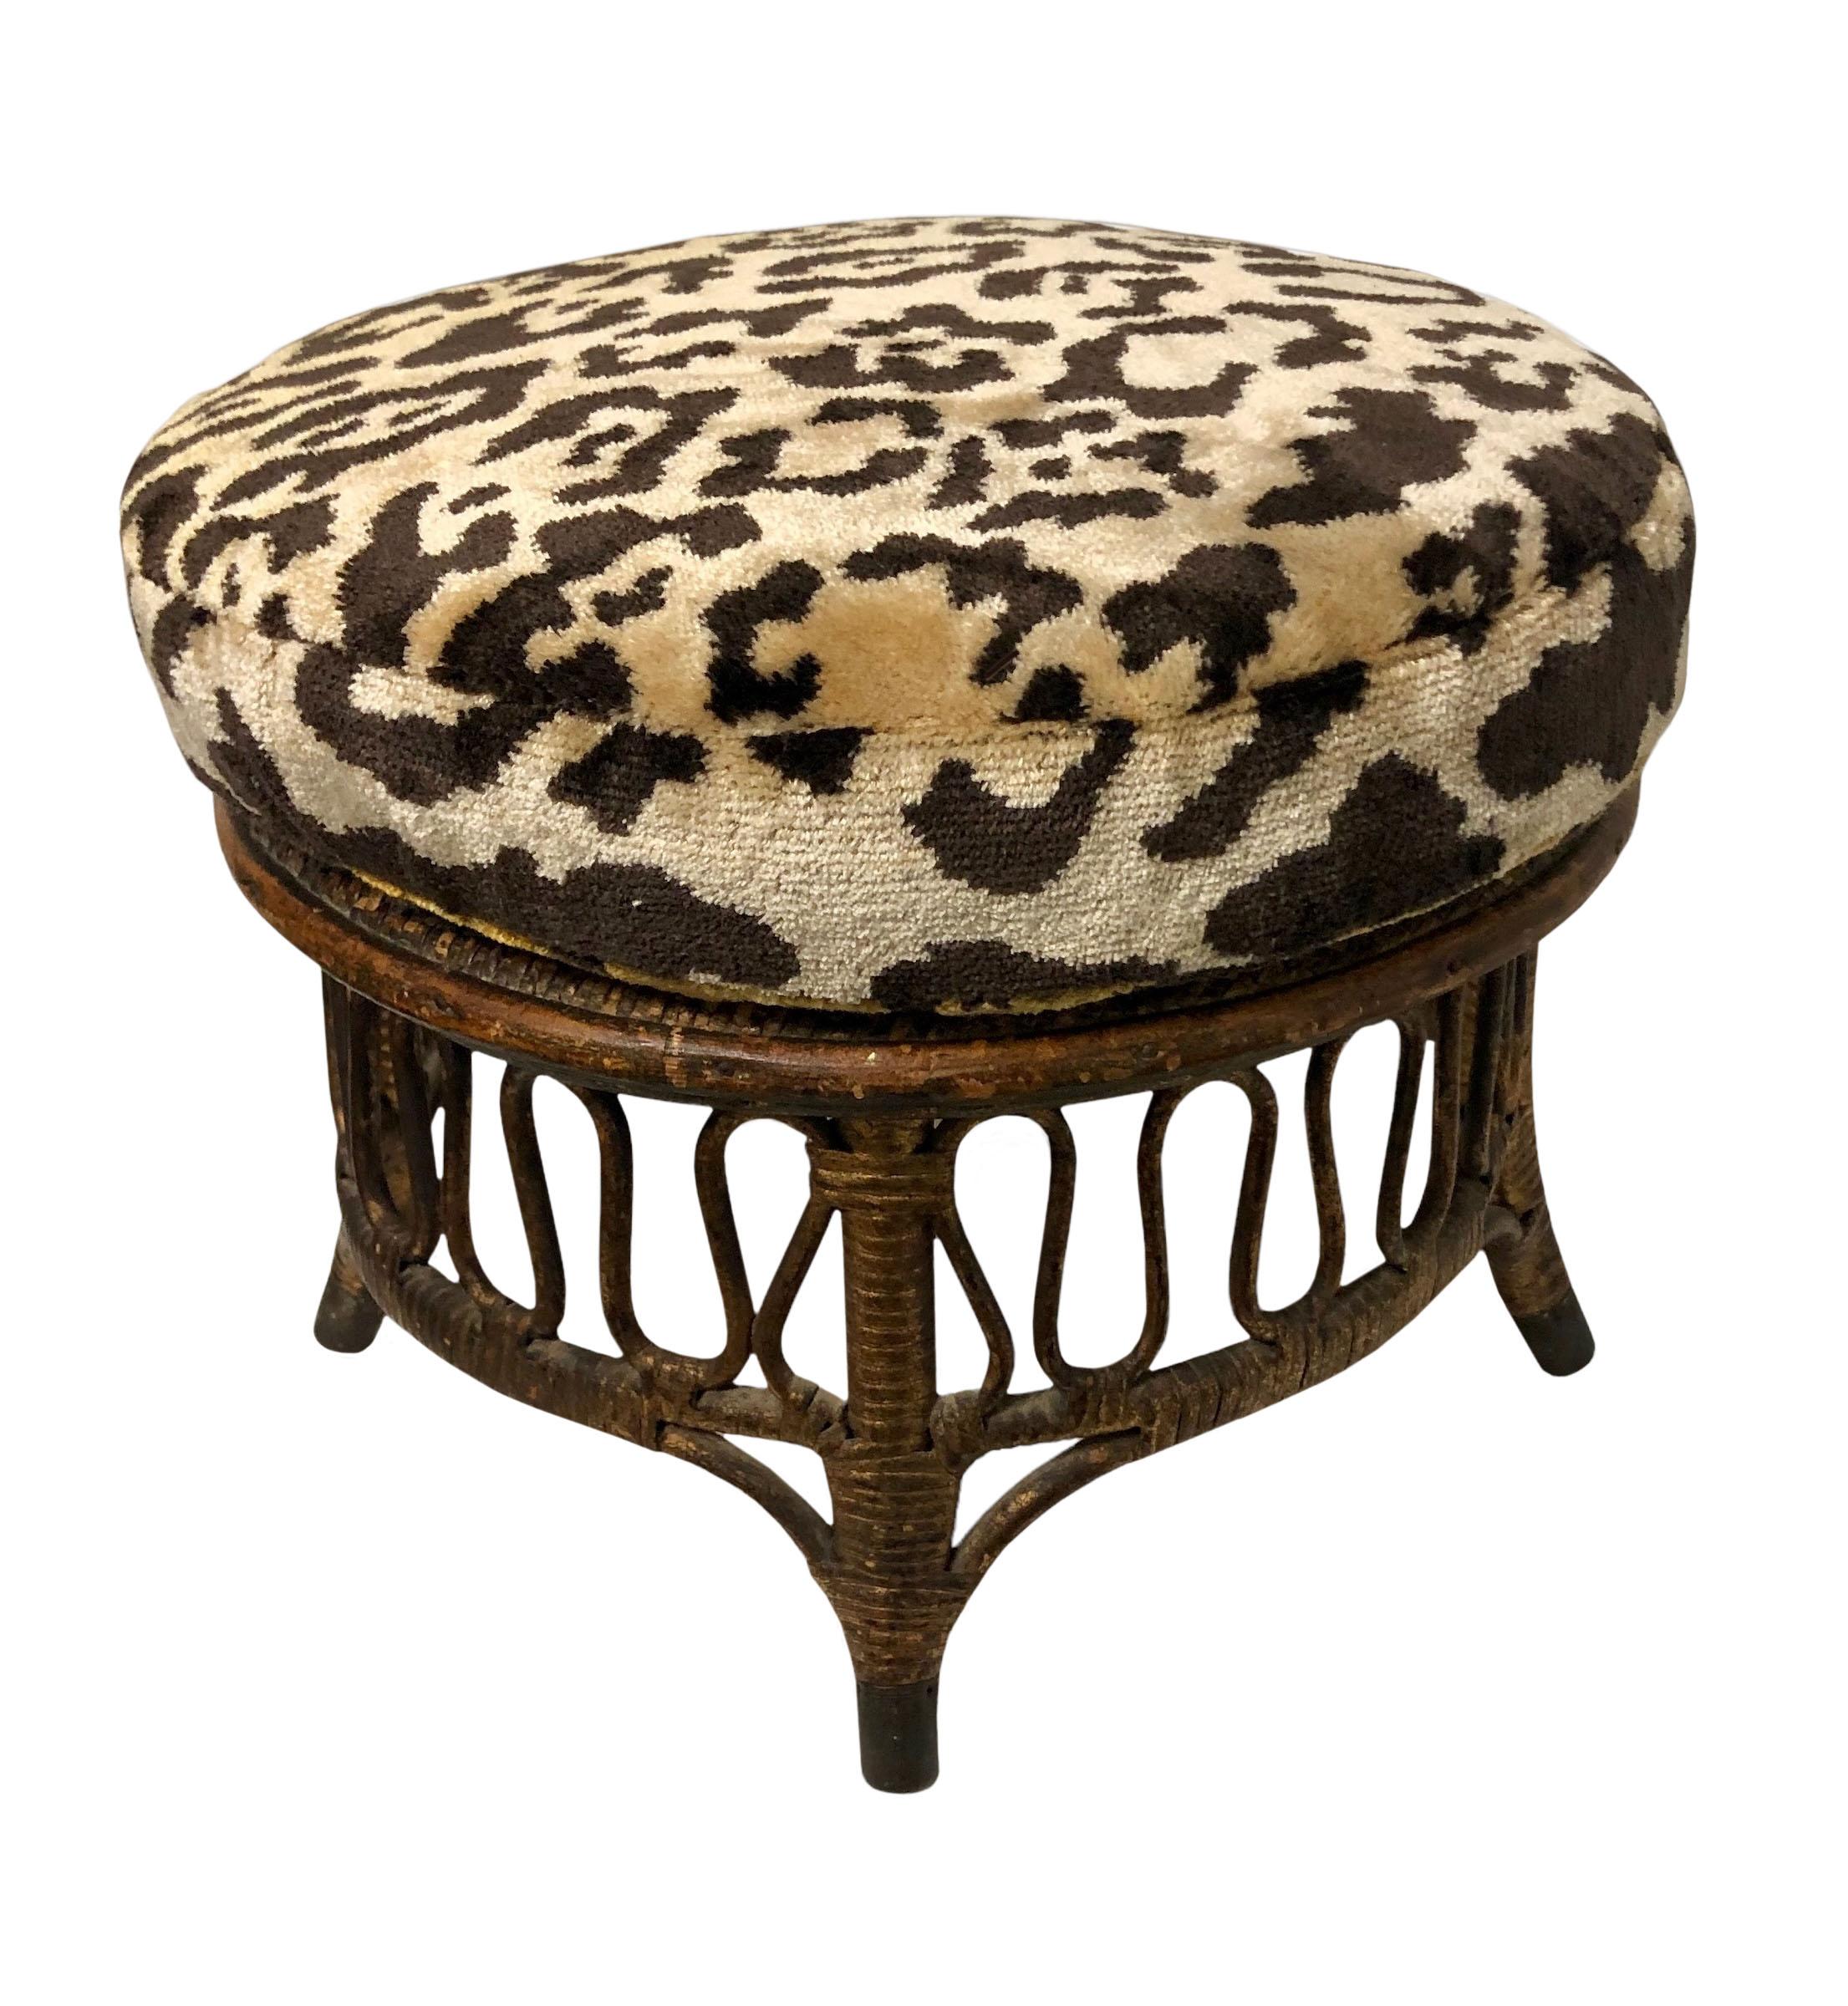 Haywood Wakefield Stool in Tiger Velvet Upholstery In Good Condition For Sale In Tampa, FL